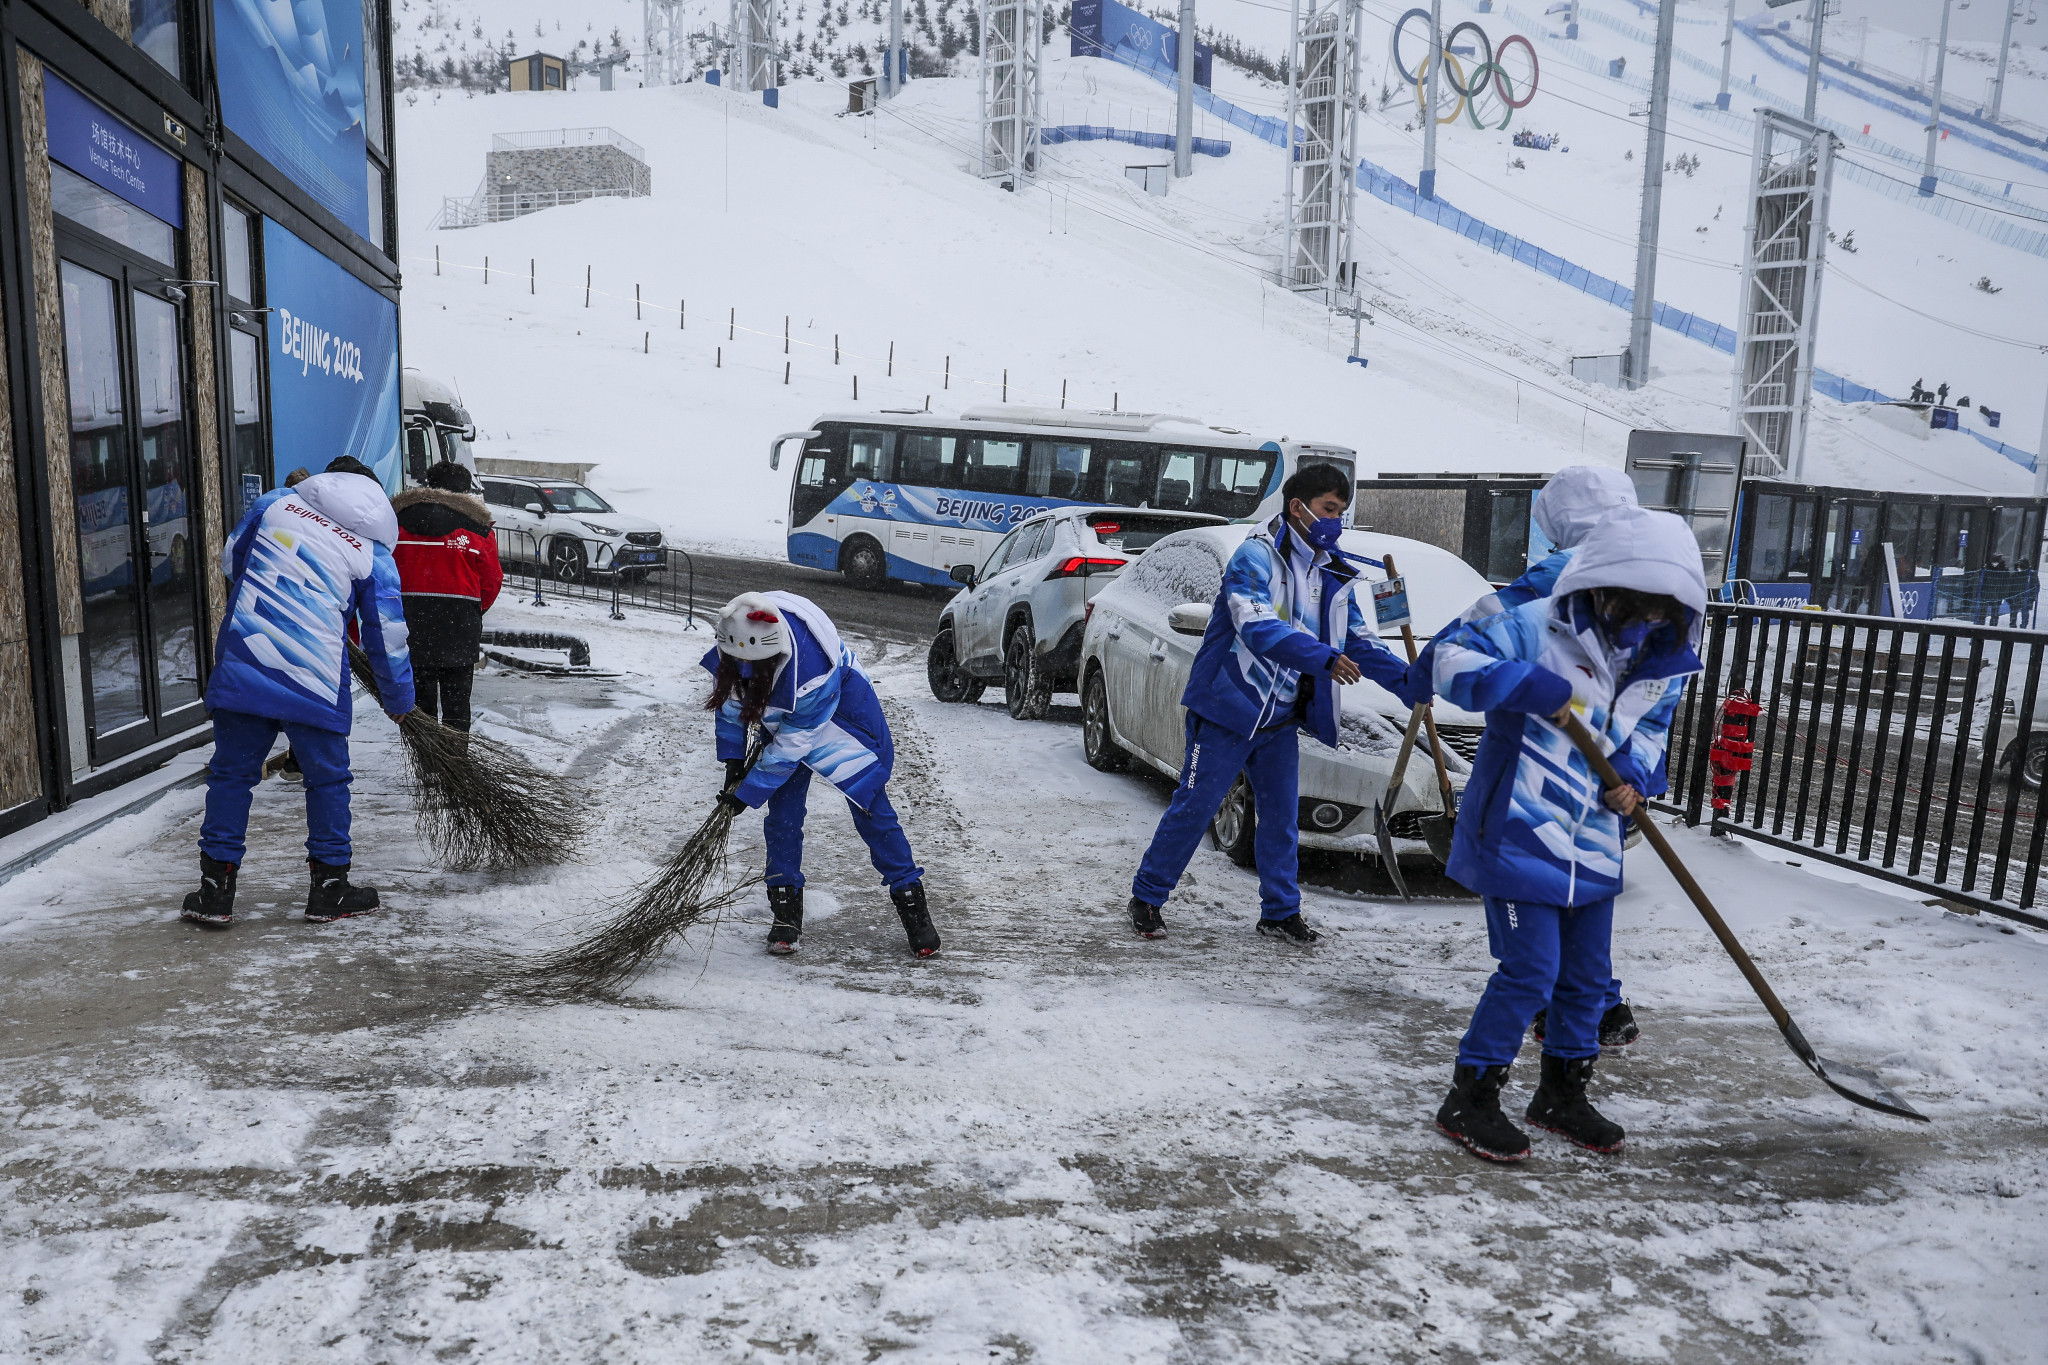 Beijing 2022 pays tribute to volunteers during challenging Winter Olympics 